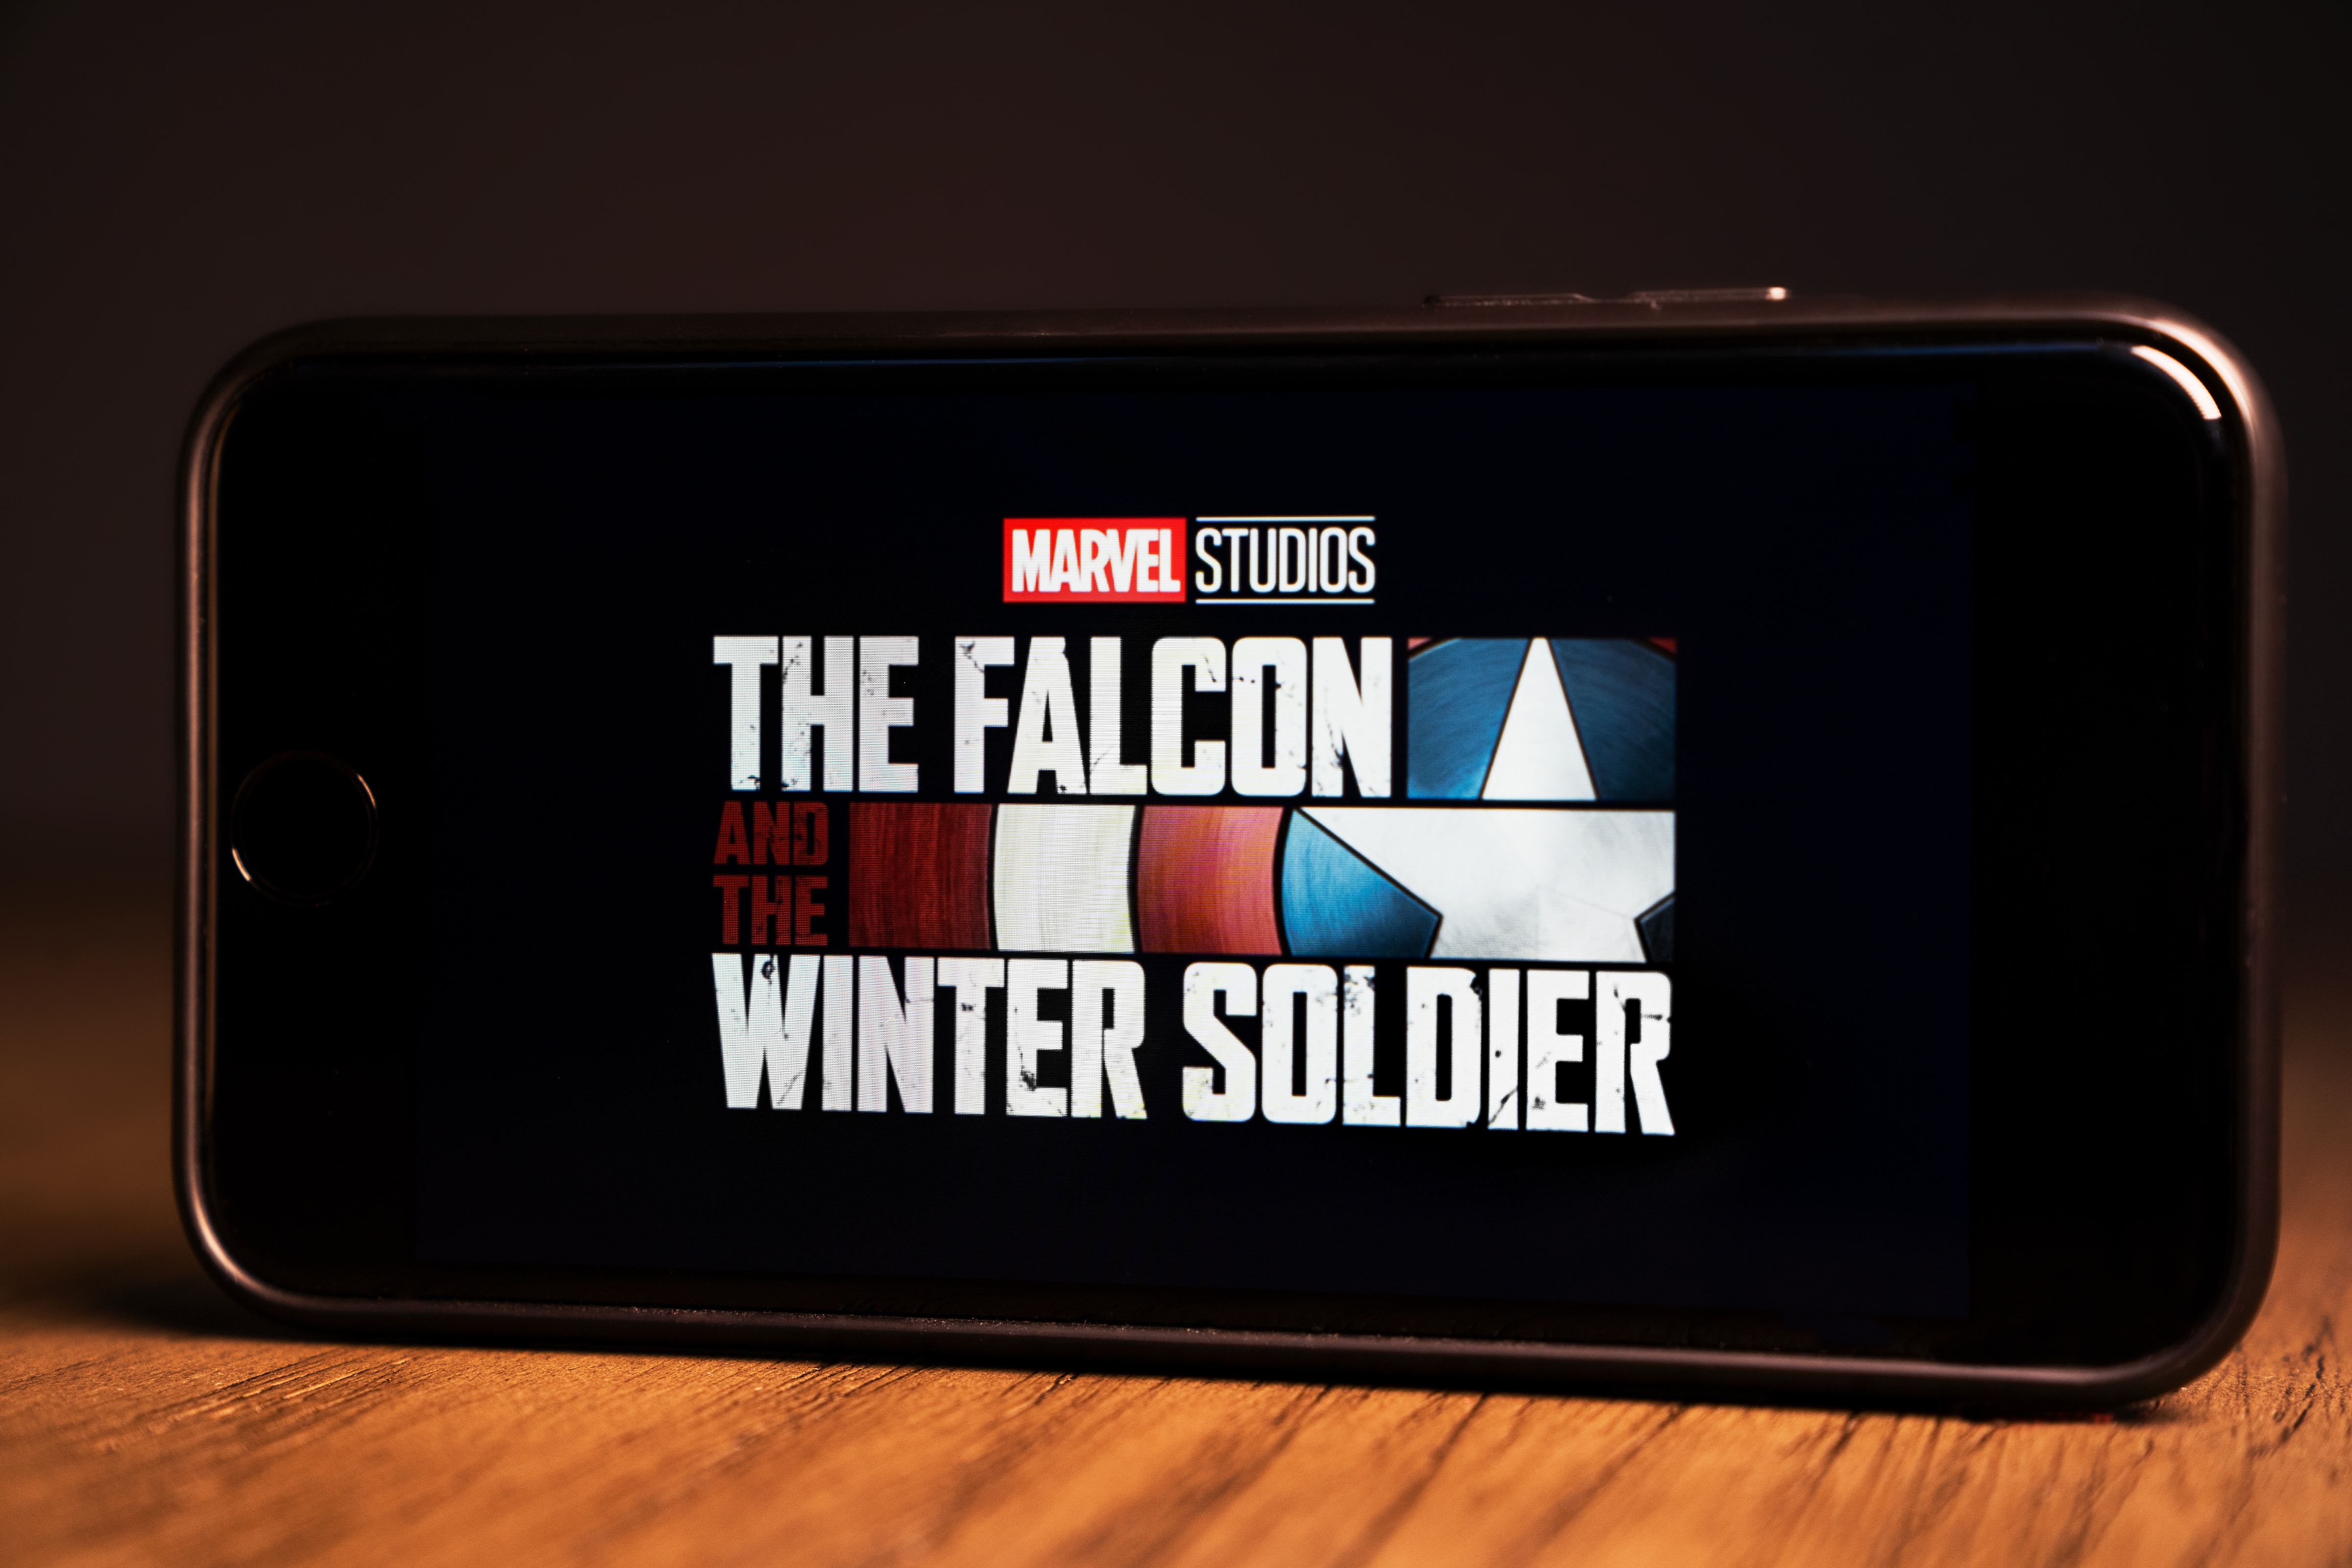 Marvel’s ‘The Falcon and the Winter Soldier’ Delayed Until 2021